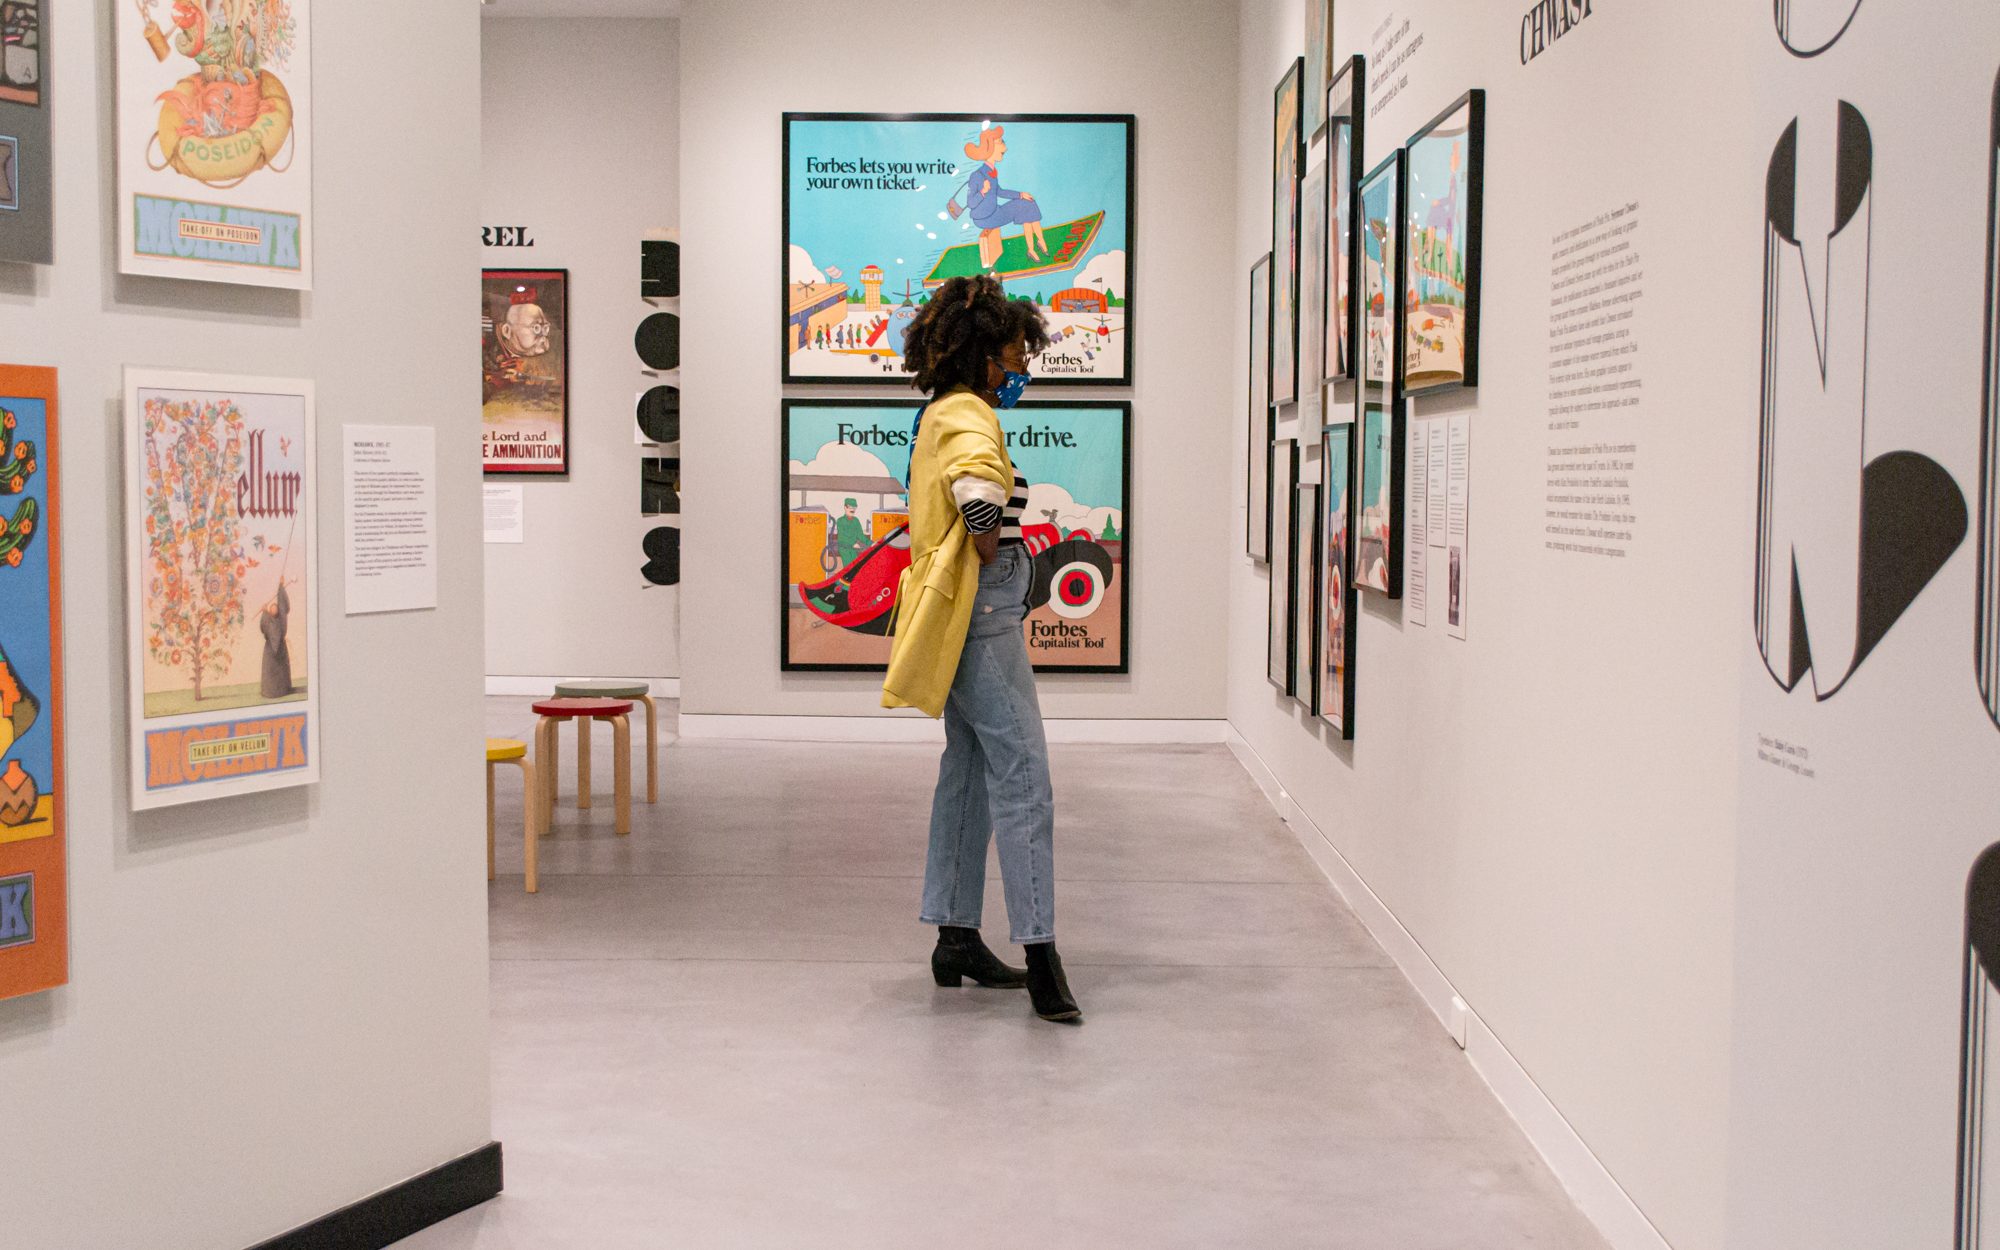 A masked figure stands in an exhibition gallery space, looking at framed posters on a wall.